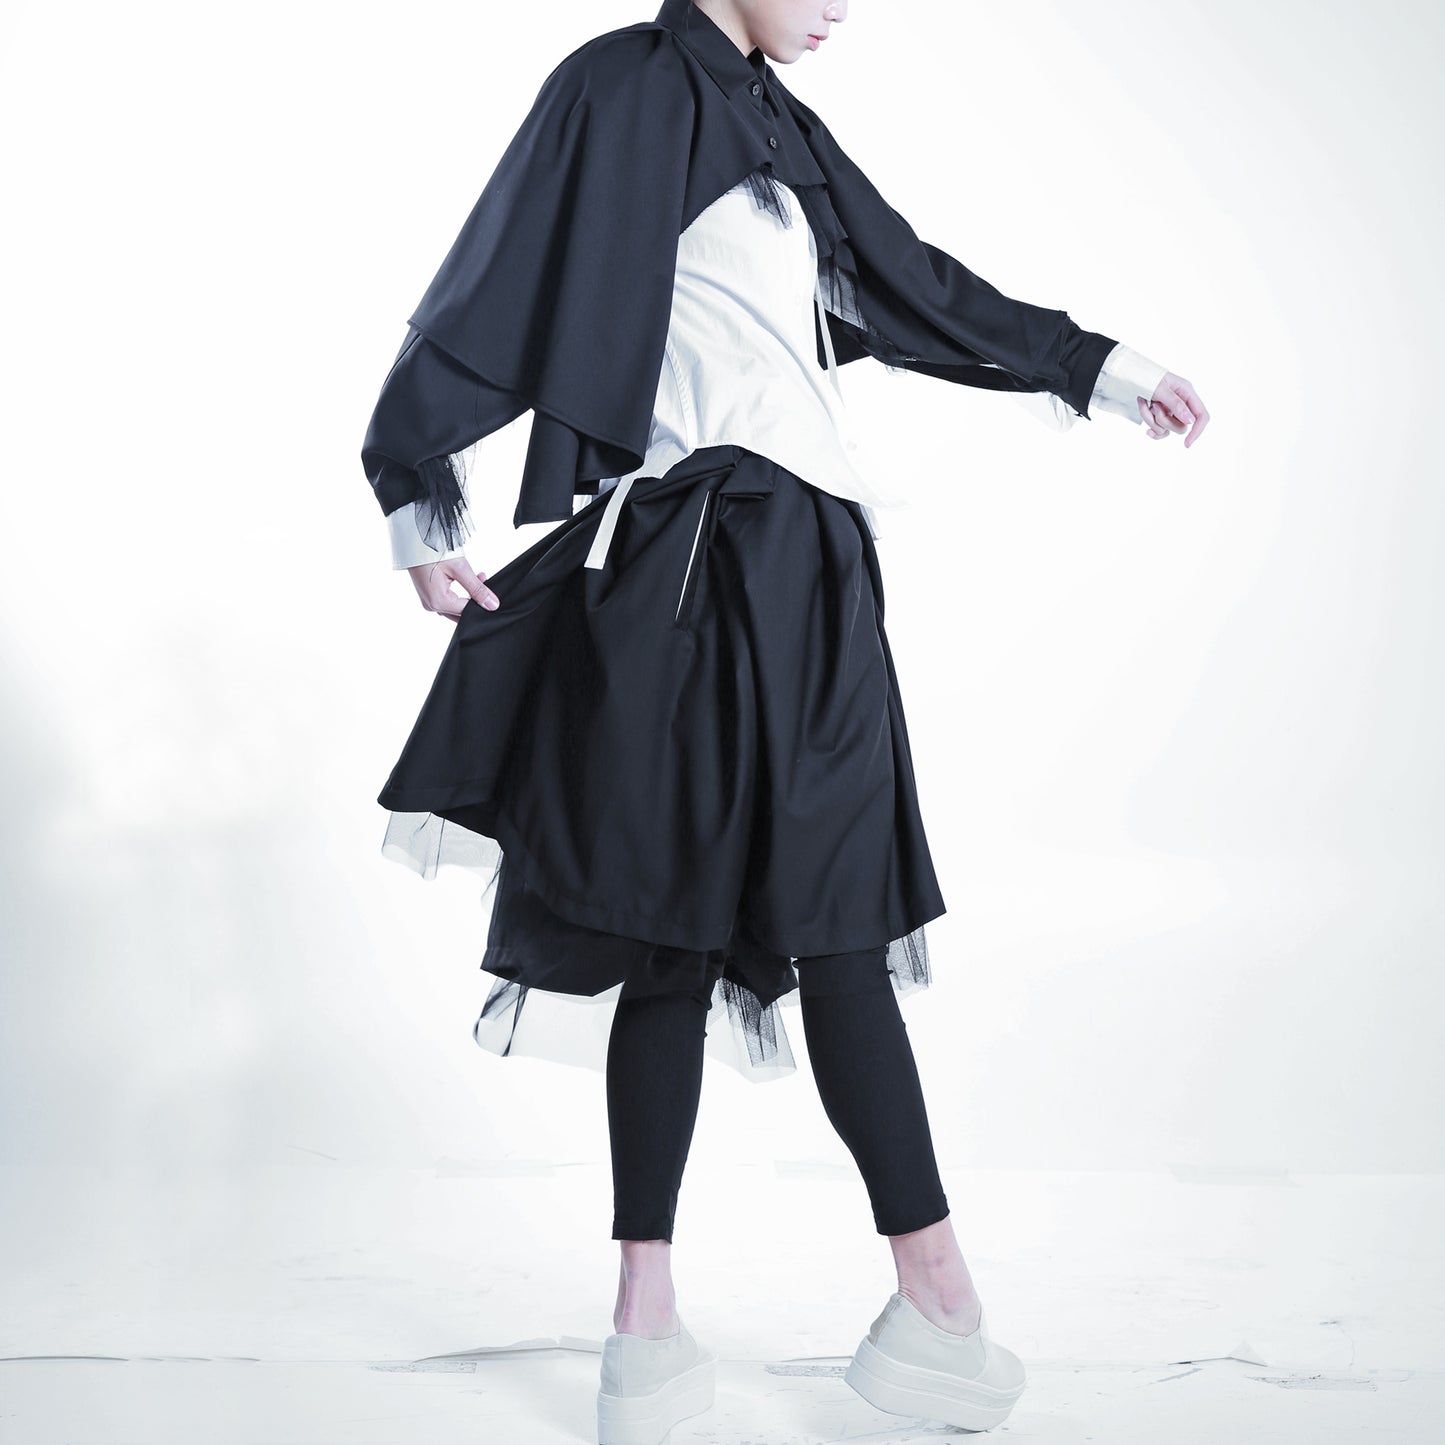 Jacket - Cape with Back Pleats